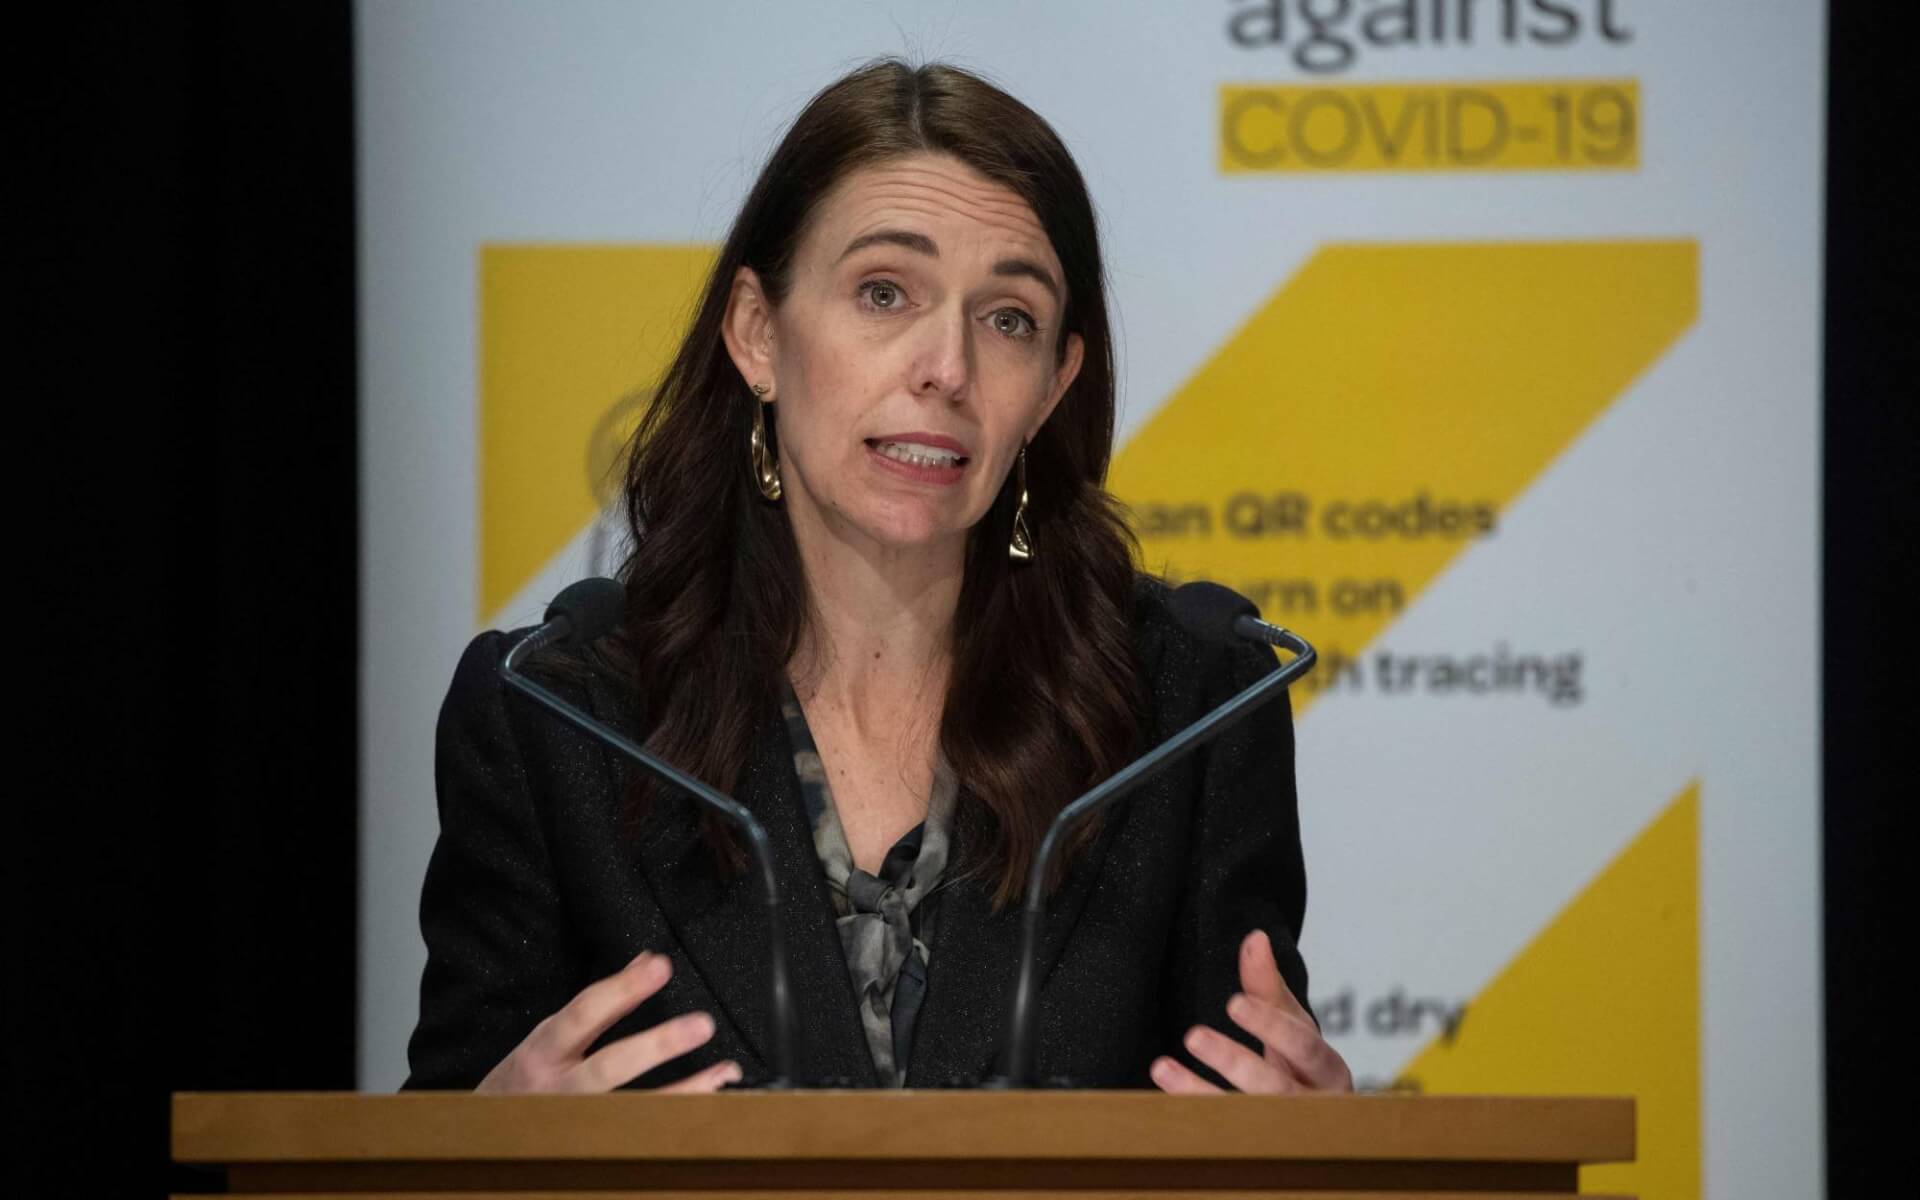 New Zealand PM Ardern Faces Backlash Over Spread of COVID-19